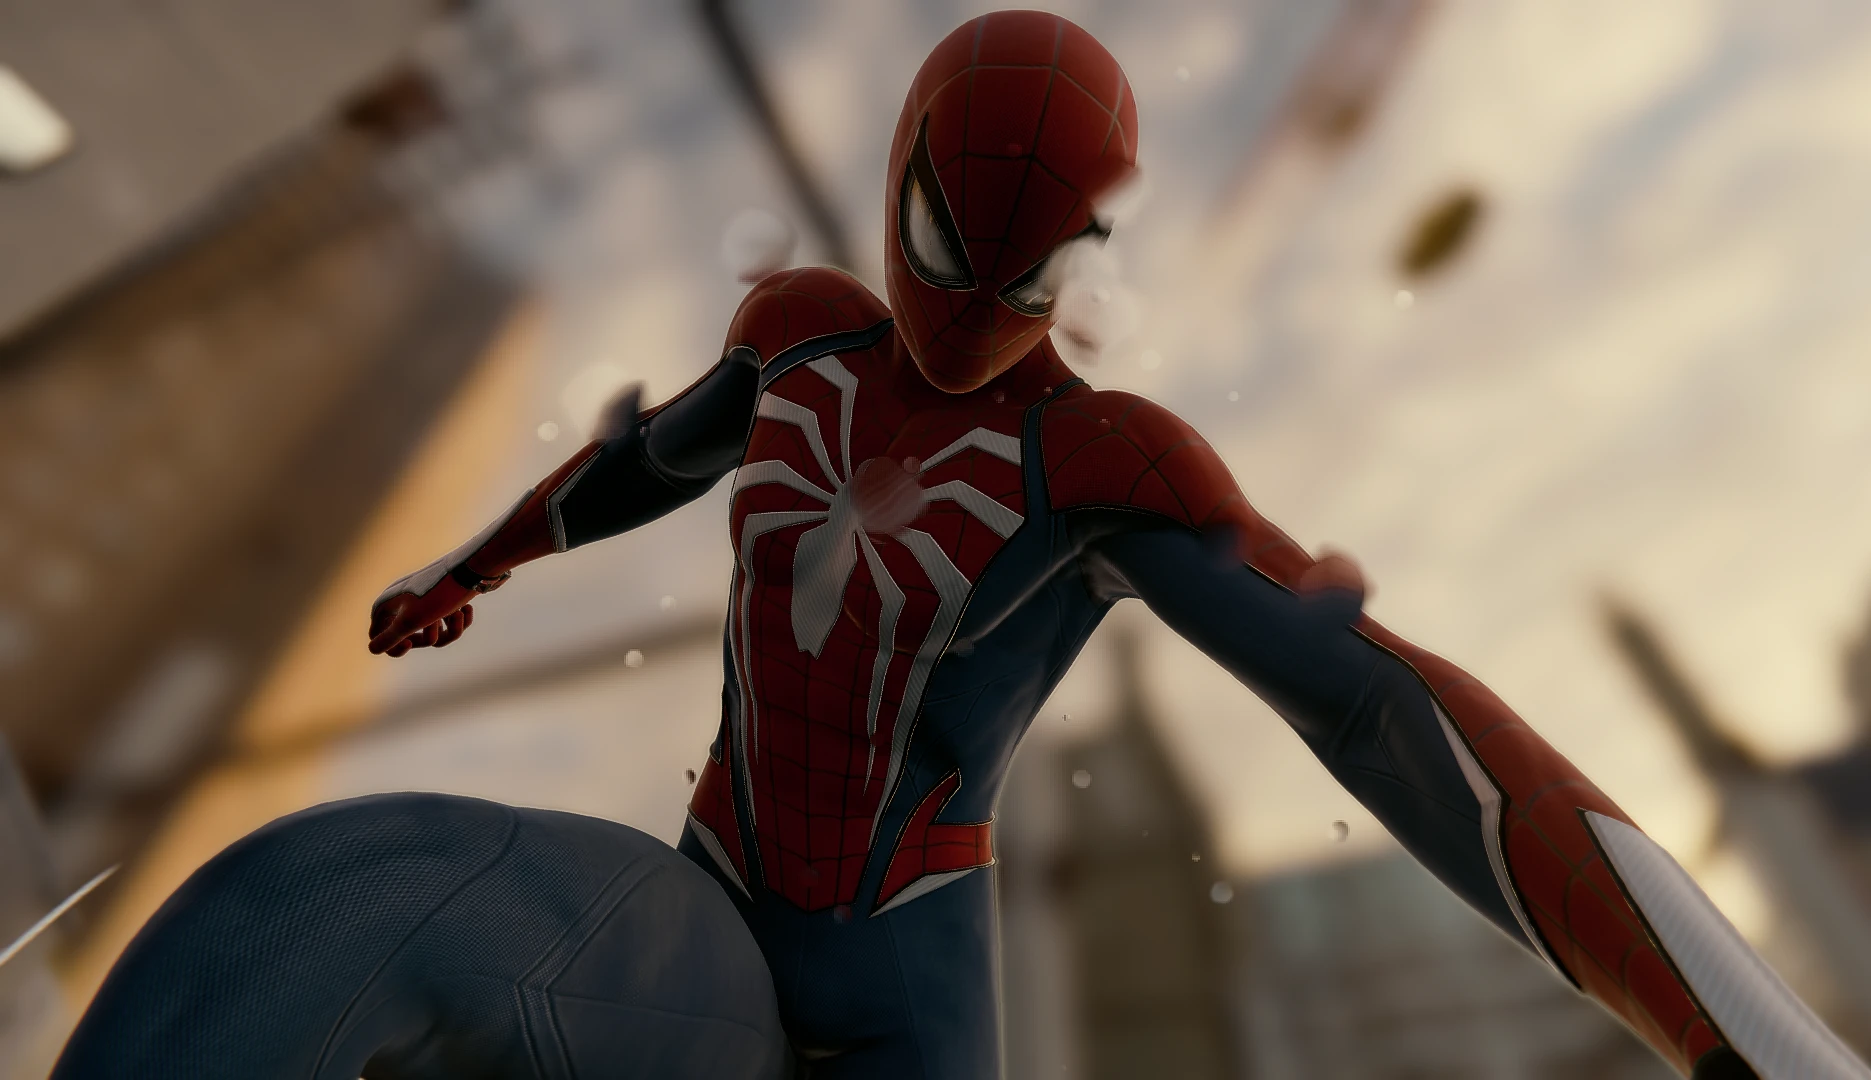 Mod categories at Marvel's Spider-Man Remastered Nexus - Mods and community